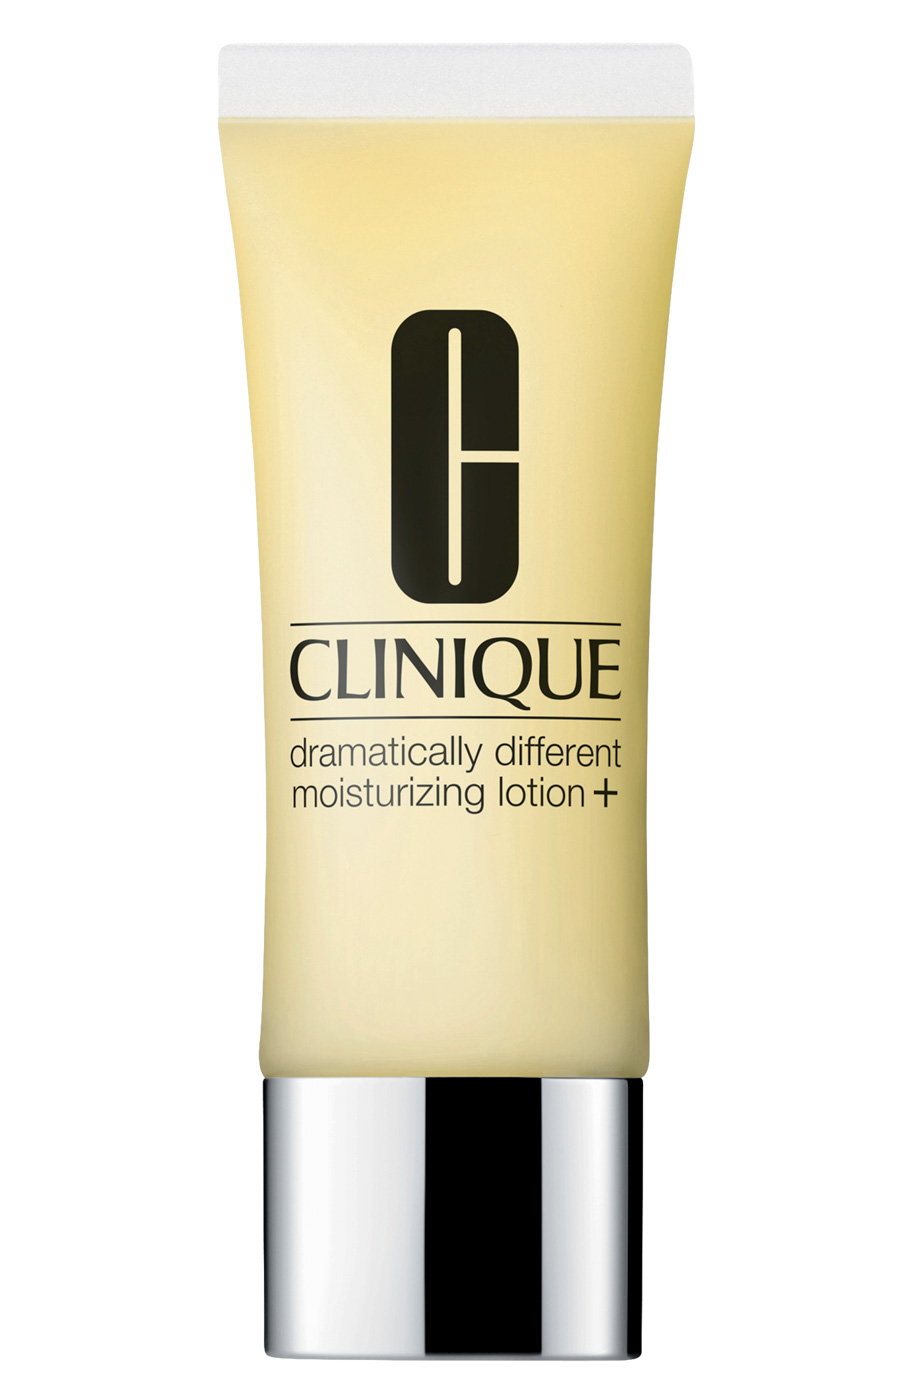 50 Sr2023 03 143 Clinique Travel Size Dramatically Different Moisturizing Lotion, Nordstrom Old Orchard, 847 677 2121